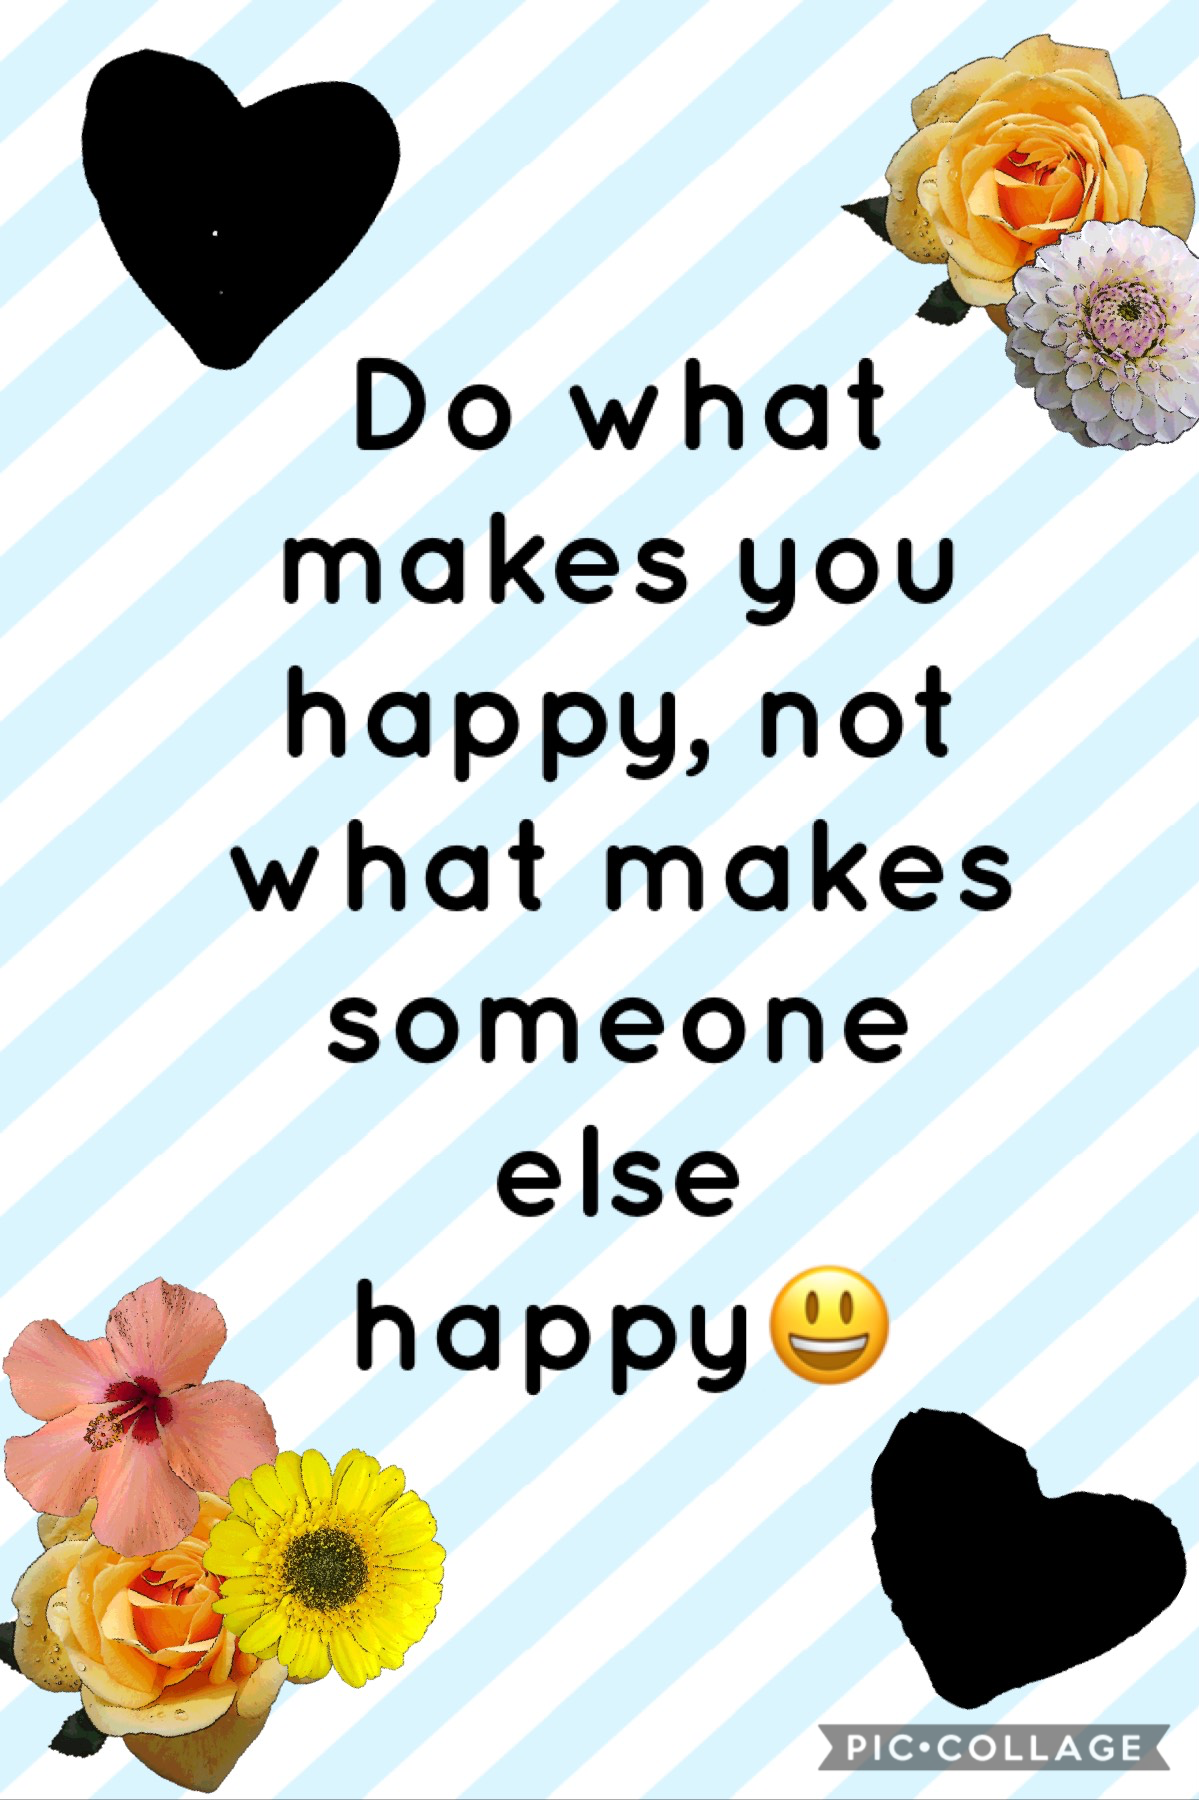 What makes you happy??